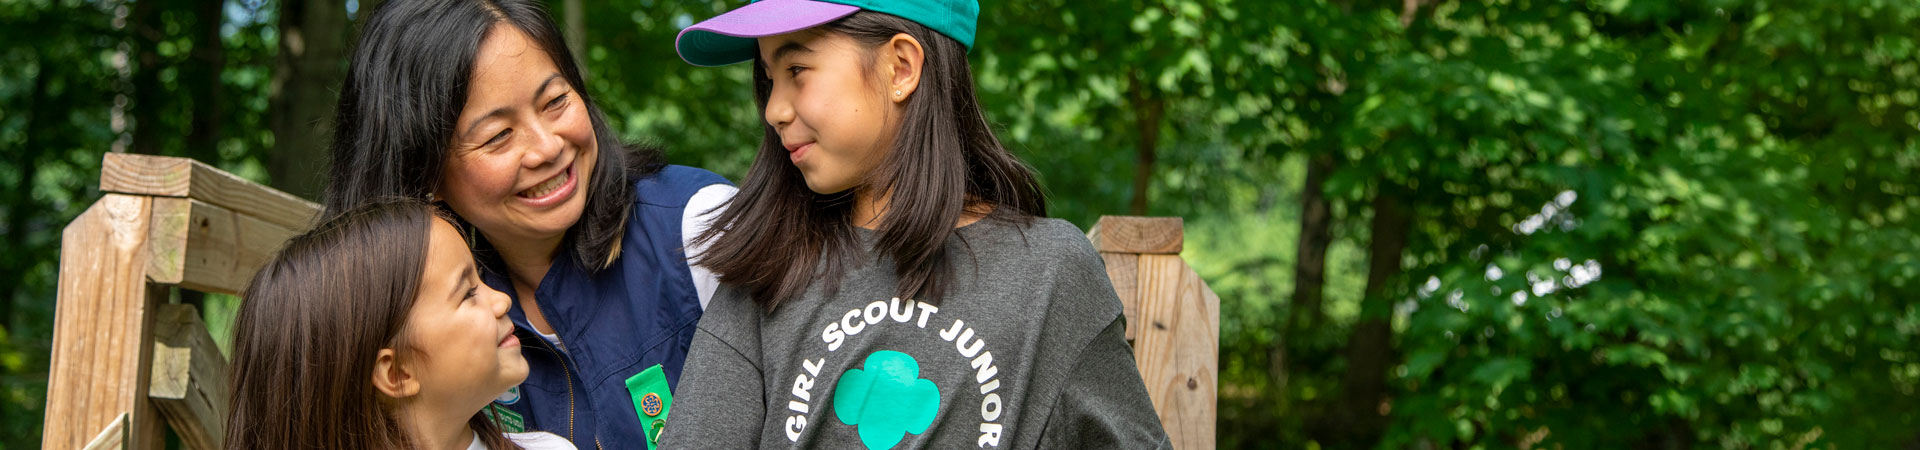  Adult Girl Scout volunteer and two youth Girl Scout members wearing Girl Scout apparel stand outdoors with trees behind them. 